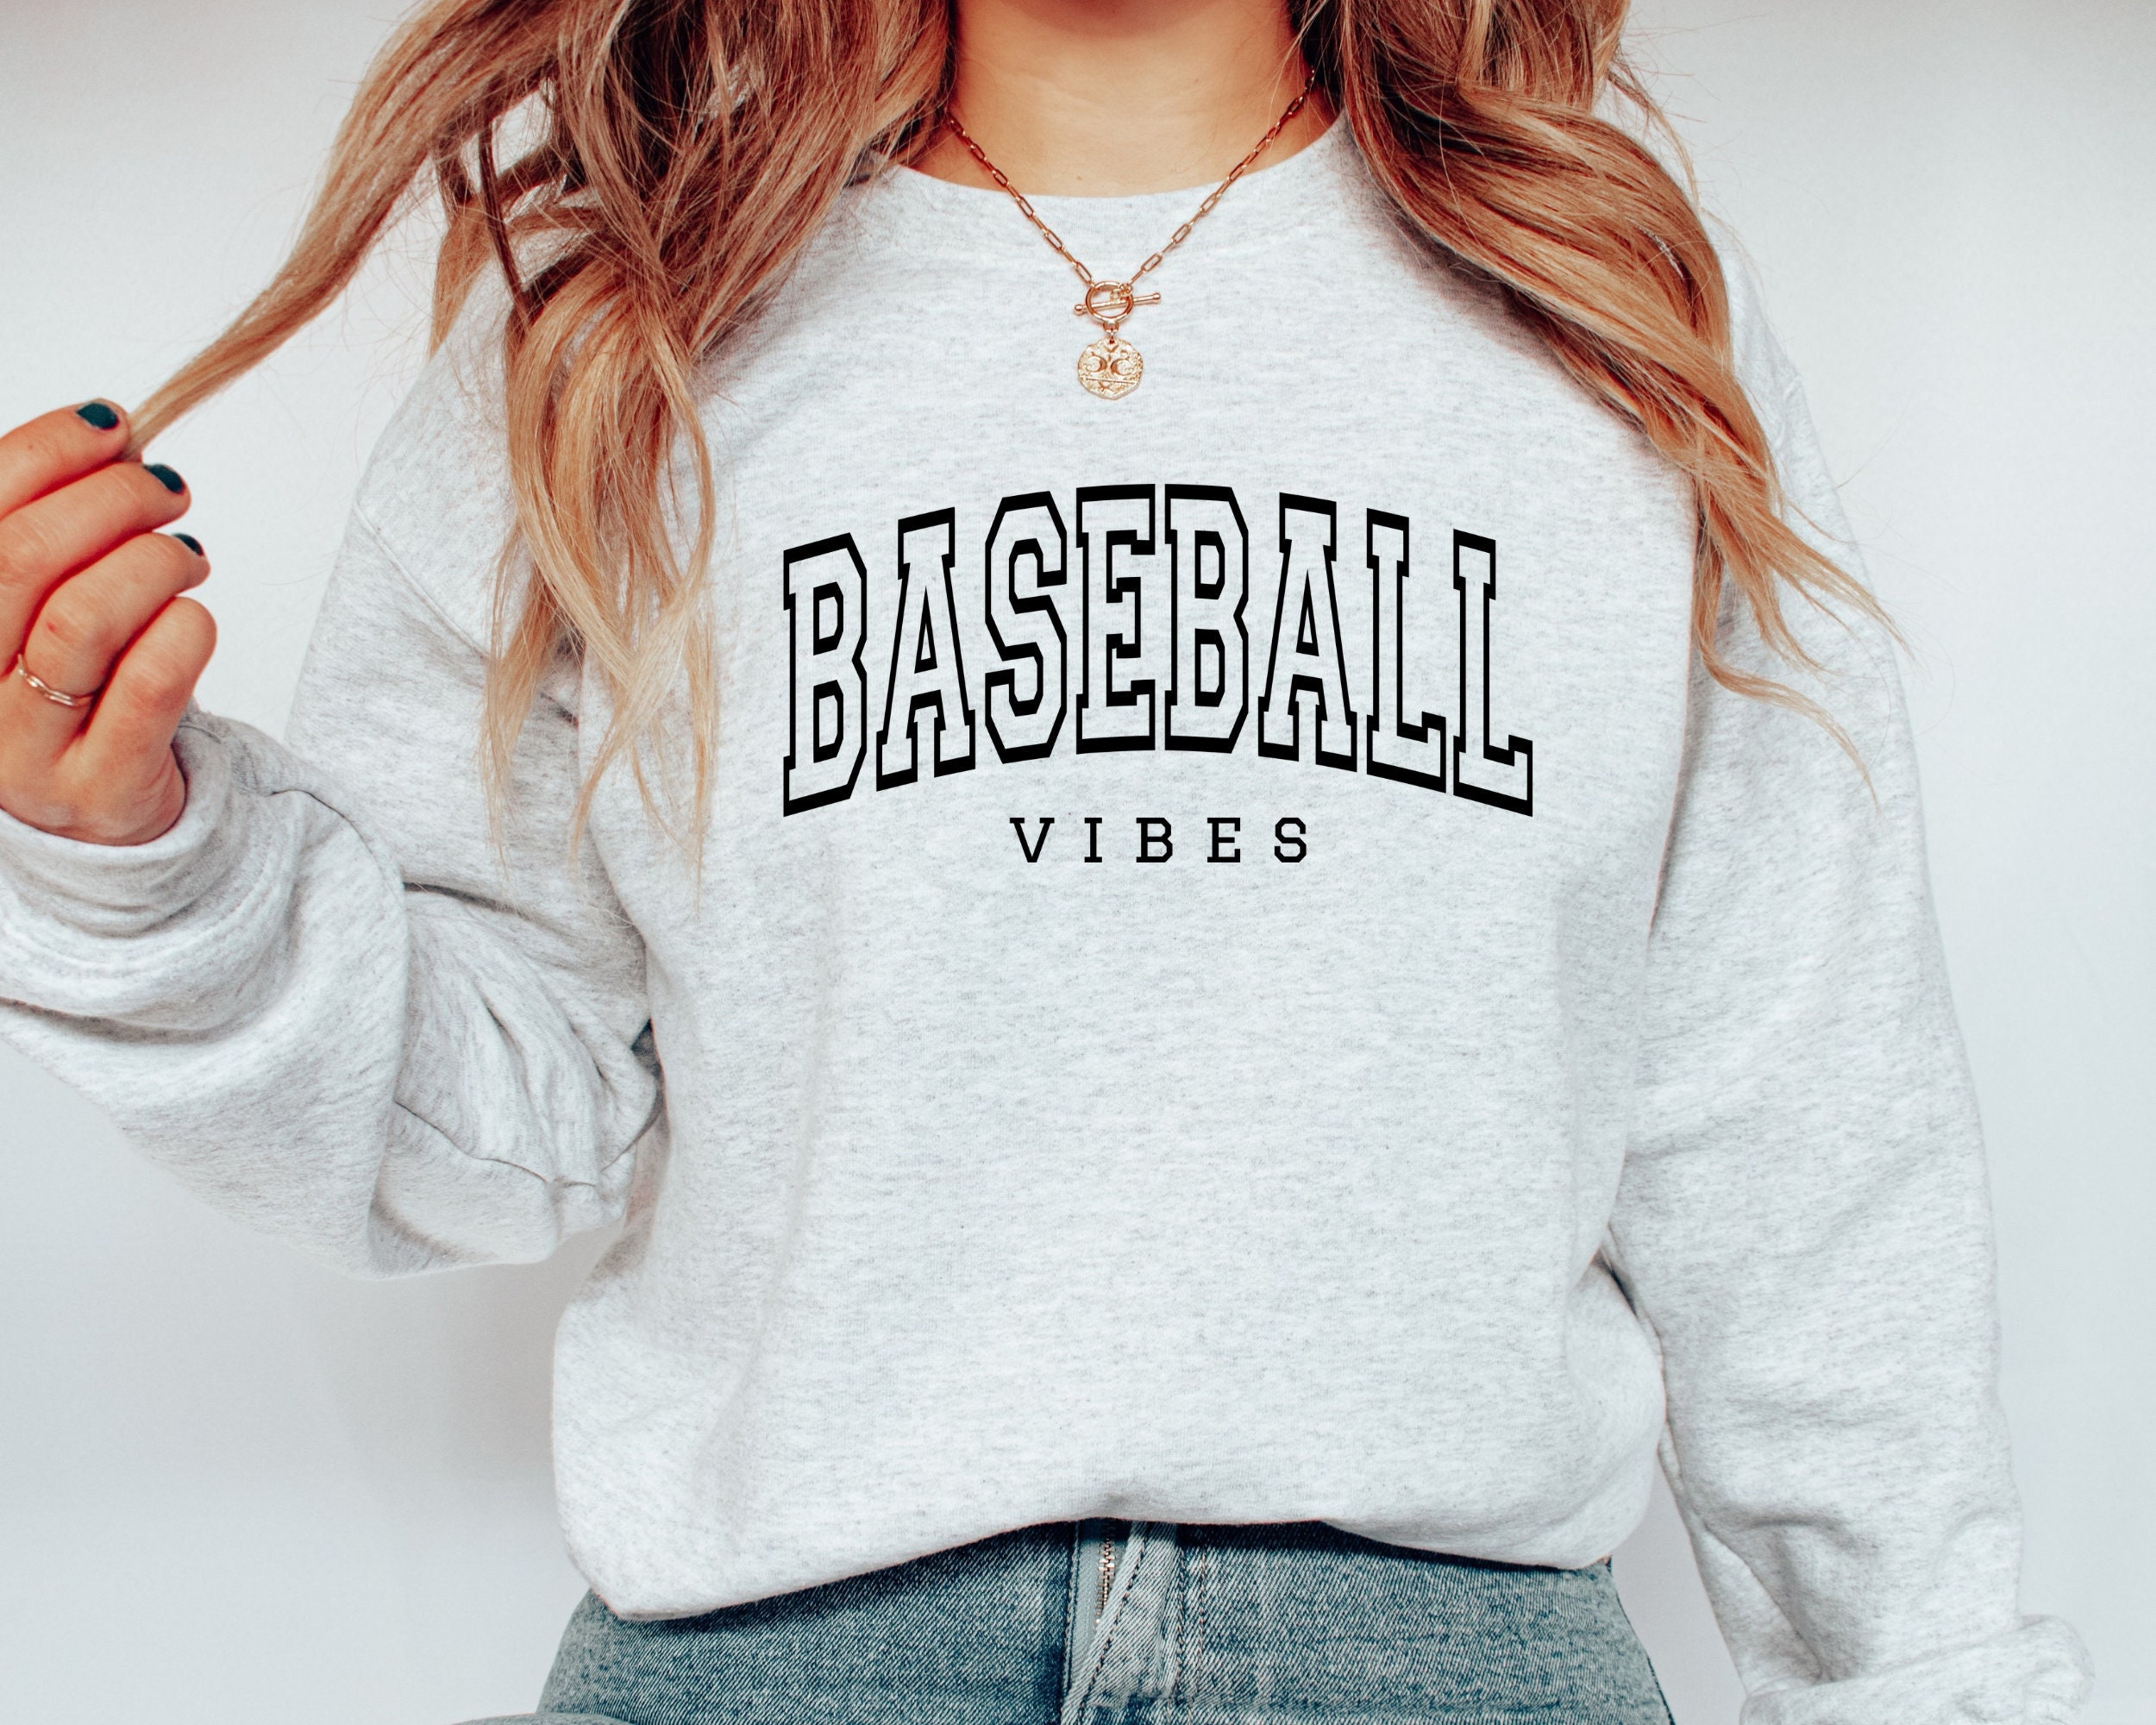 Hop on the varsity vibe with this super cool baseball jersey: http